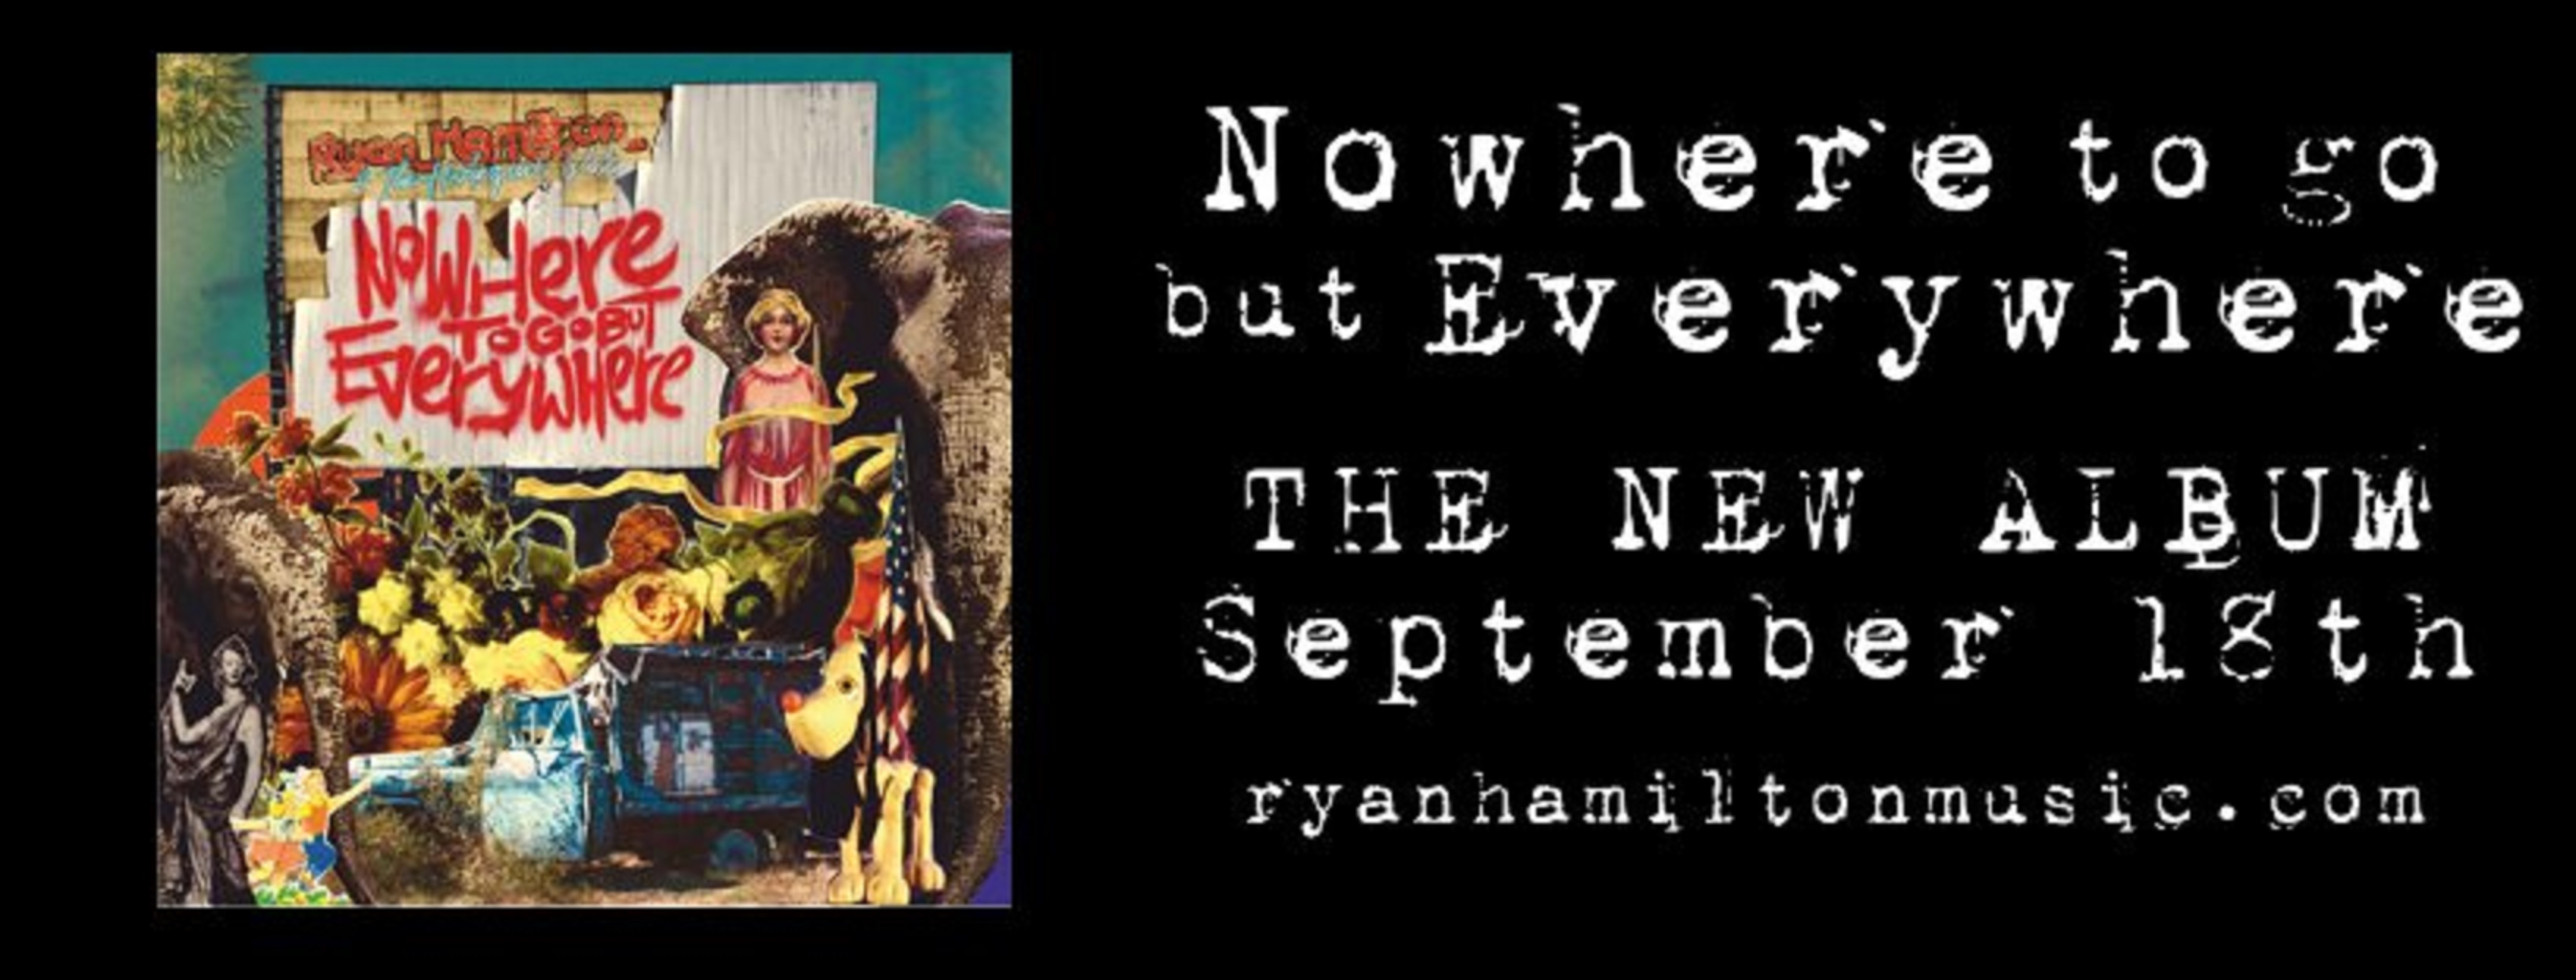 Ryan Hamilton & The Harlequin Ghosts Releasing New Album 'Nowhere To Go But Everywhere' On September 18th